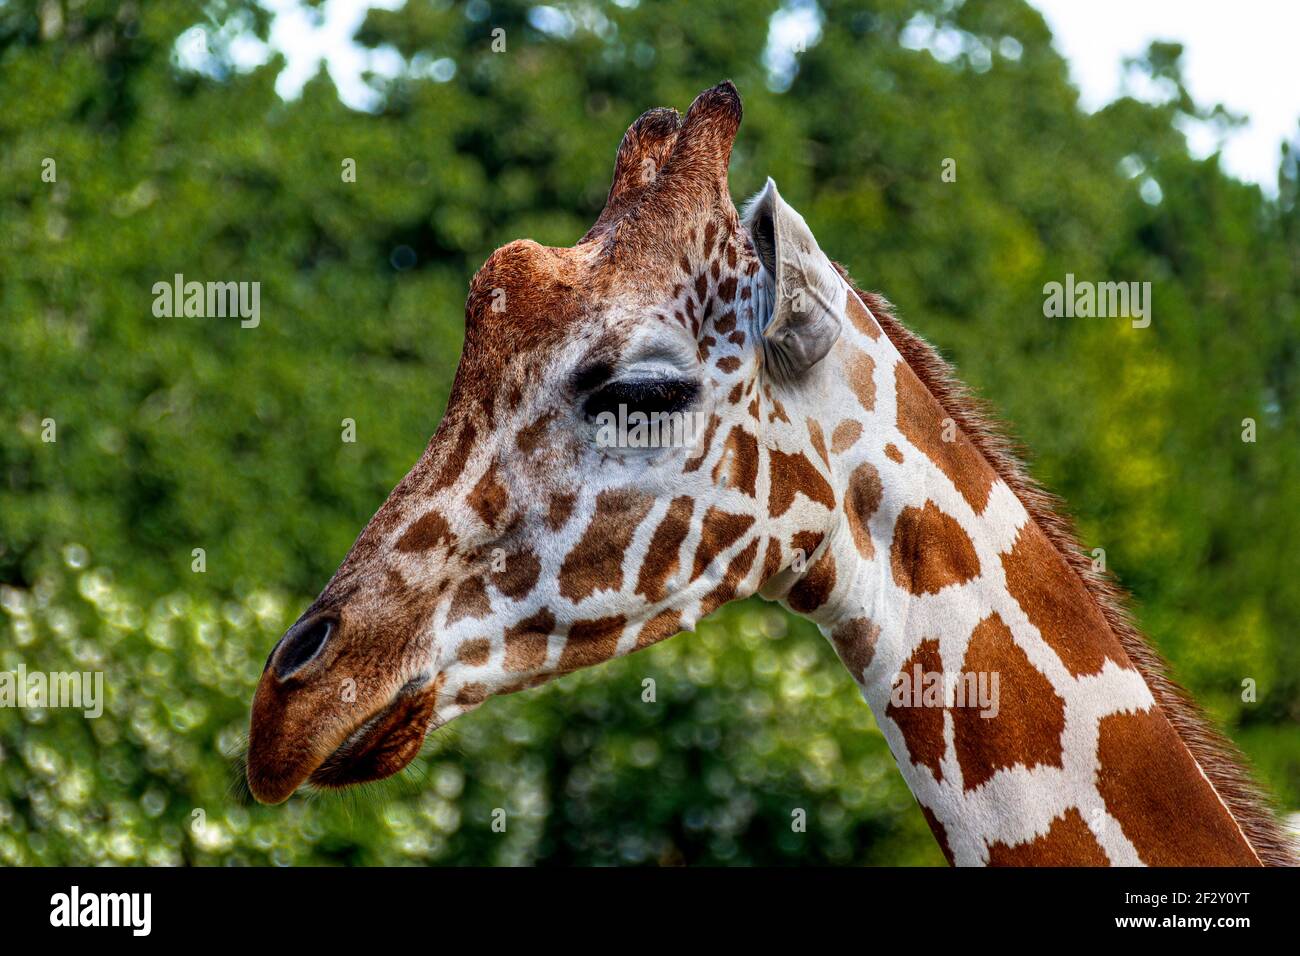 The reticulated giraffe, also known as the Somali giraffe, is a subspecies of giraffe native to the Horn of Africa. Stock Photo